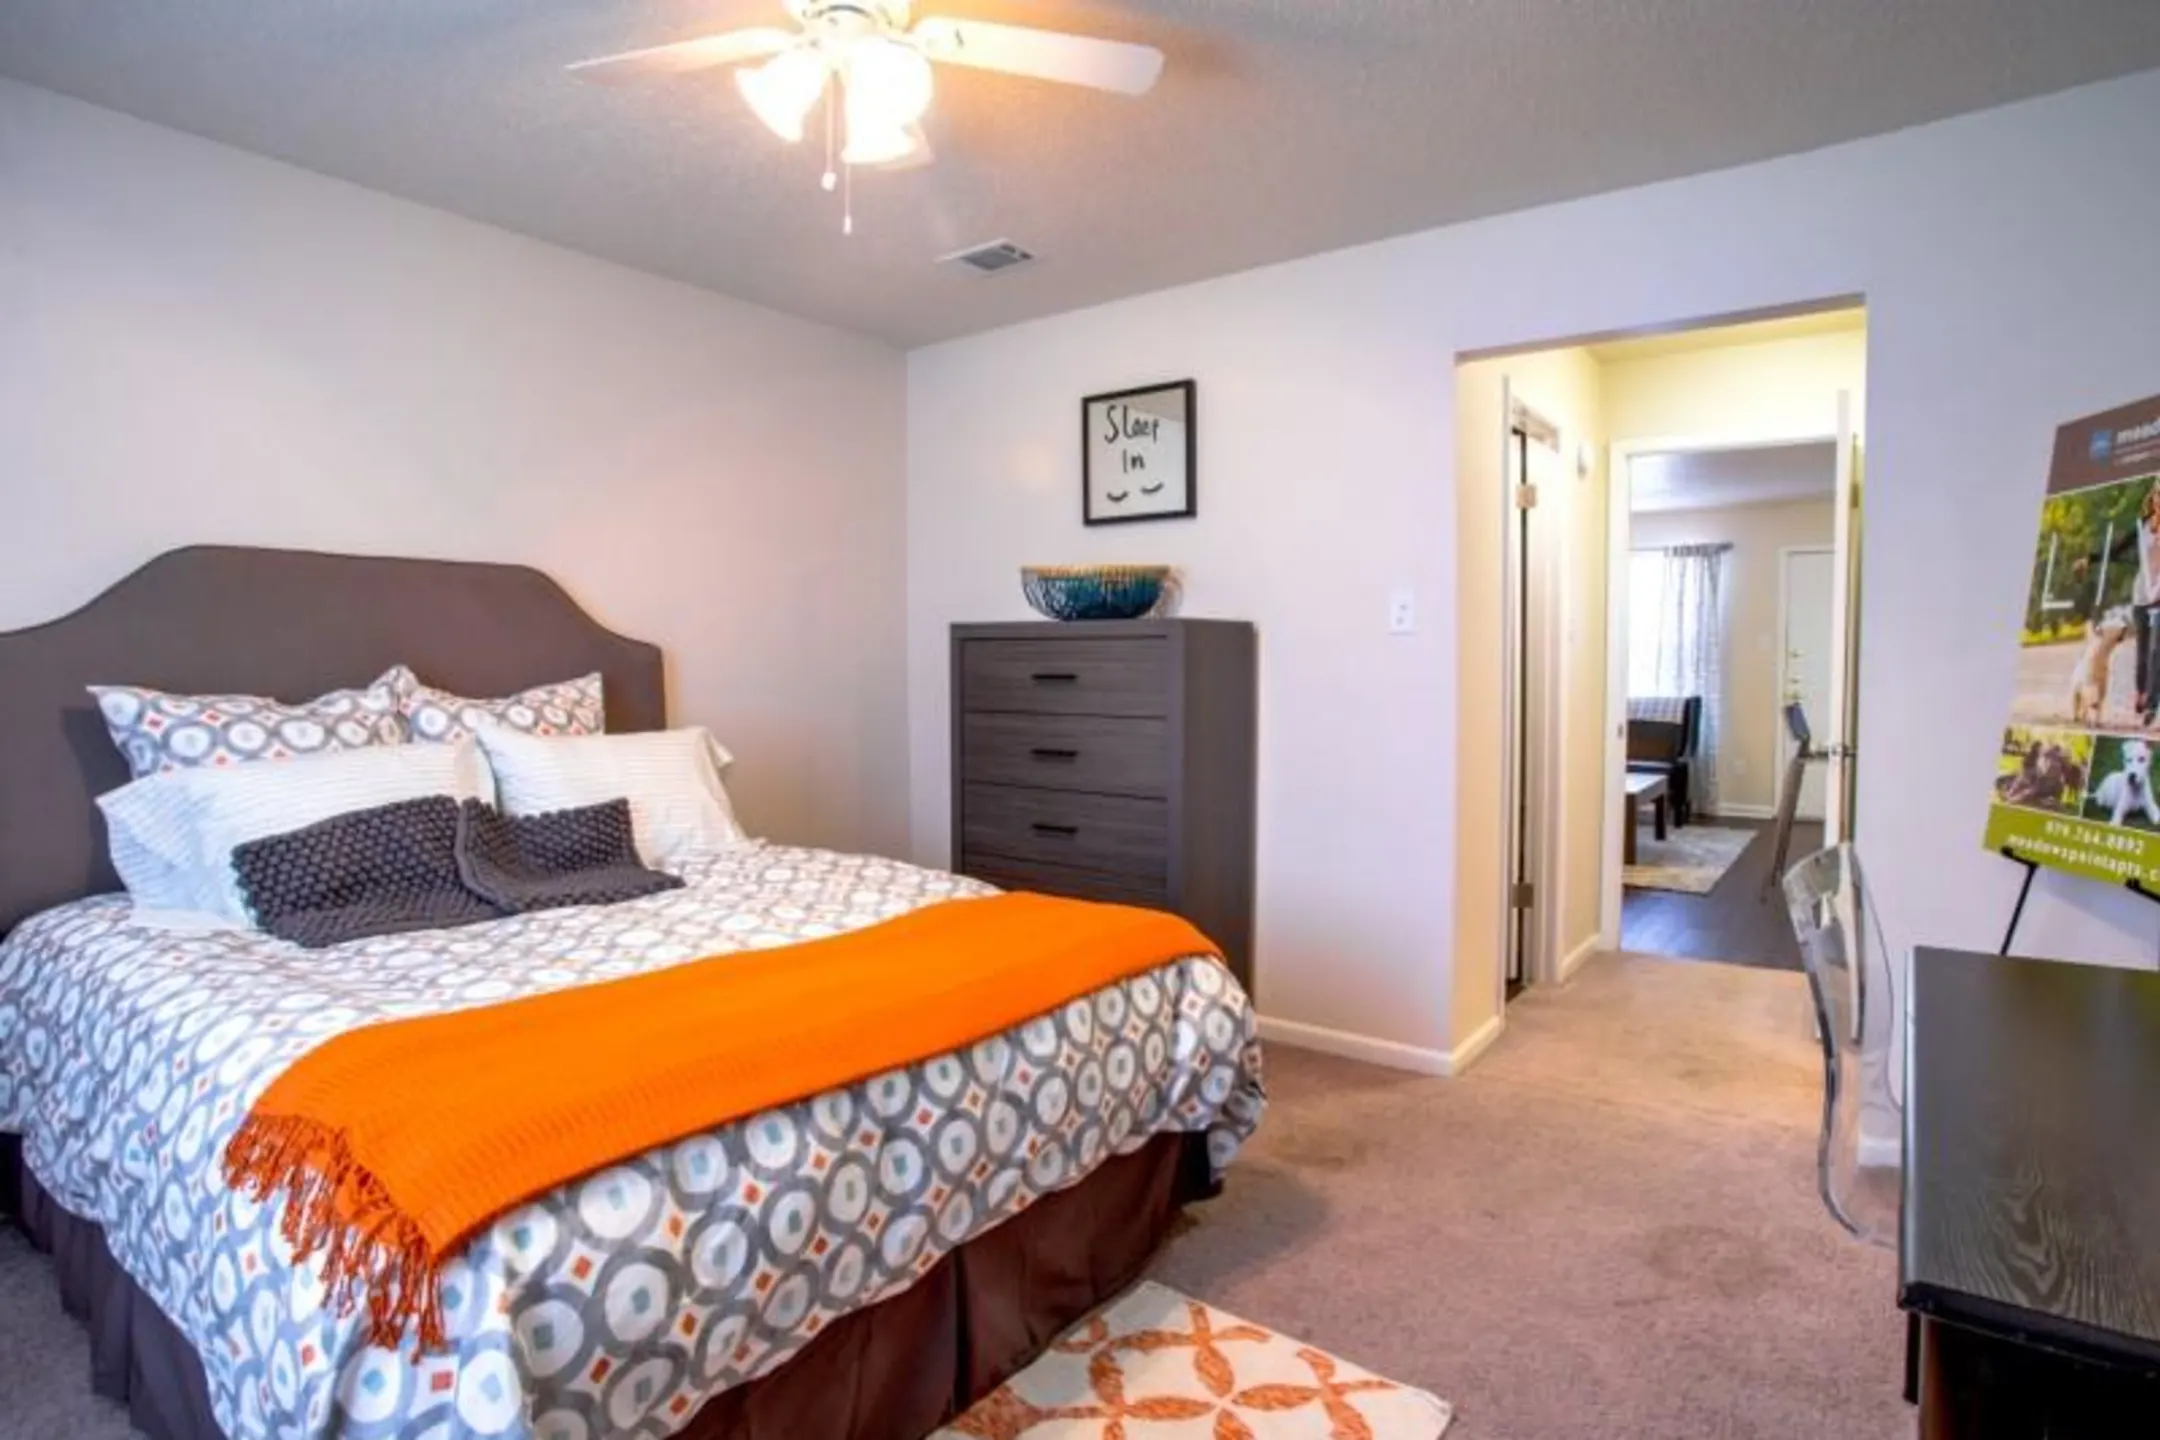 Bedroom - The Landing at College Station - College Station, TX